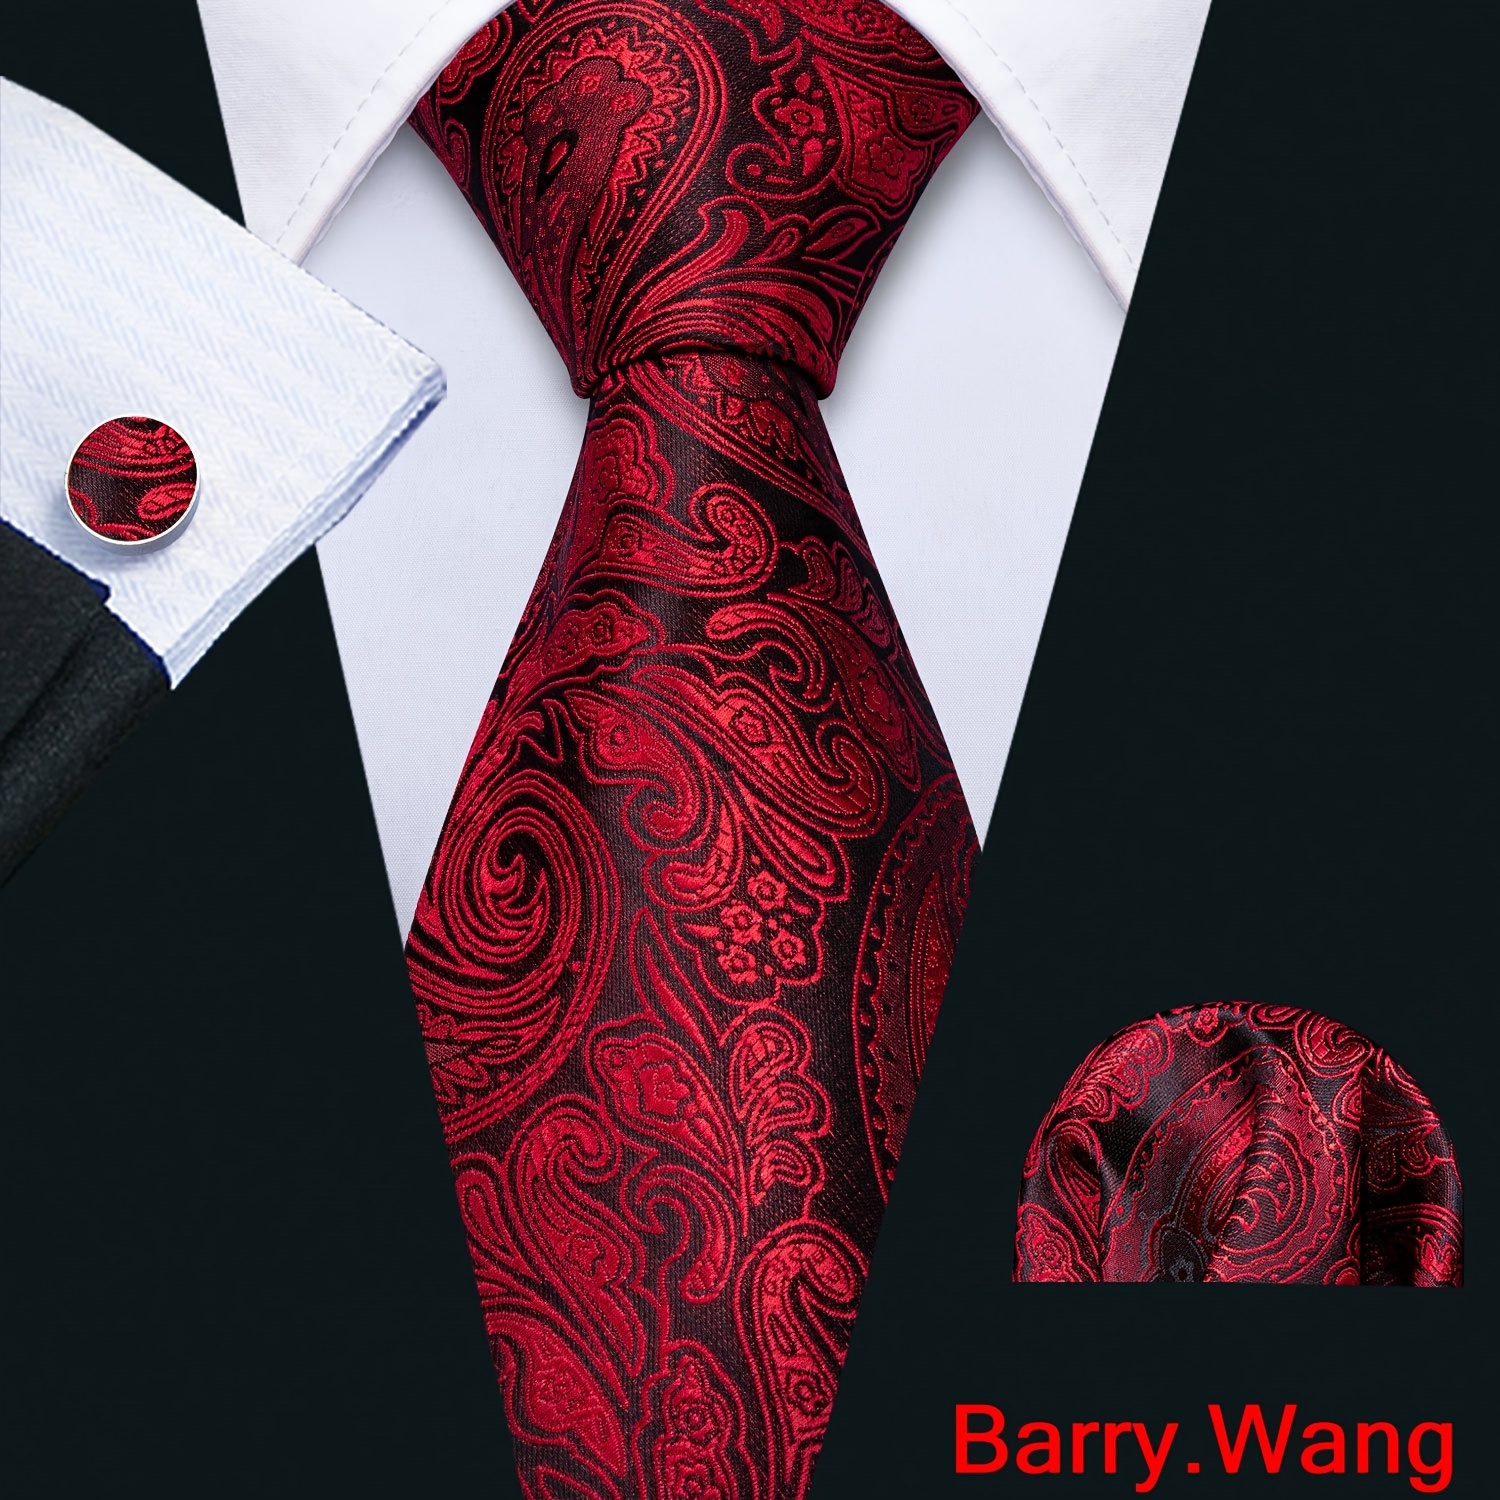 

Barry.wang 3pcs/set Men's Silk Classic Floral Paisley Necktie With Hanky And Cufflinks For Business & Wedding, Father's Day Gift